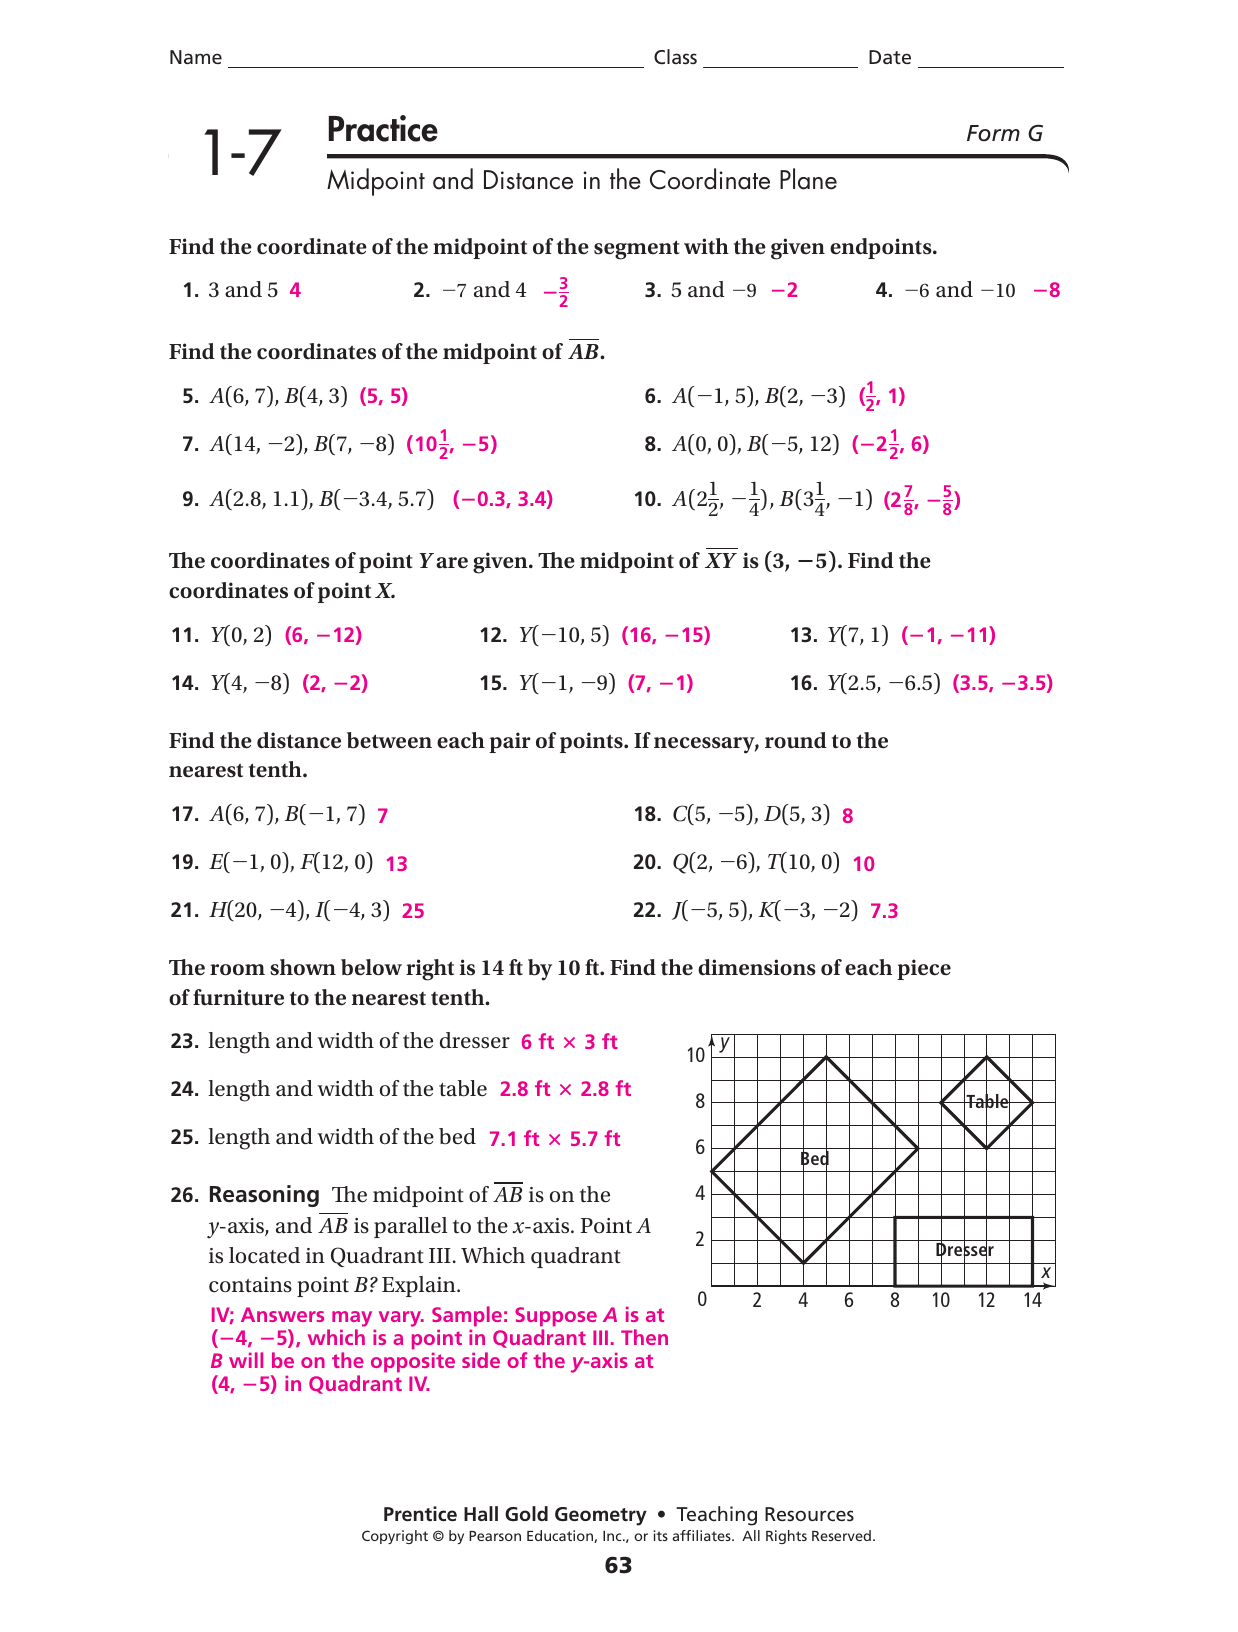 geometry-review-packet-1-distance-and-midpoints-answer-key-gustavogargiulo-free-scientific